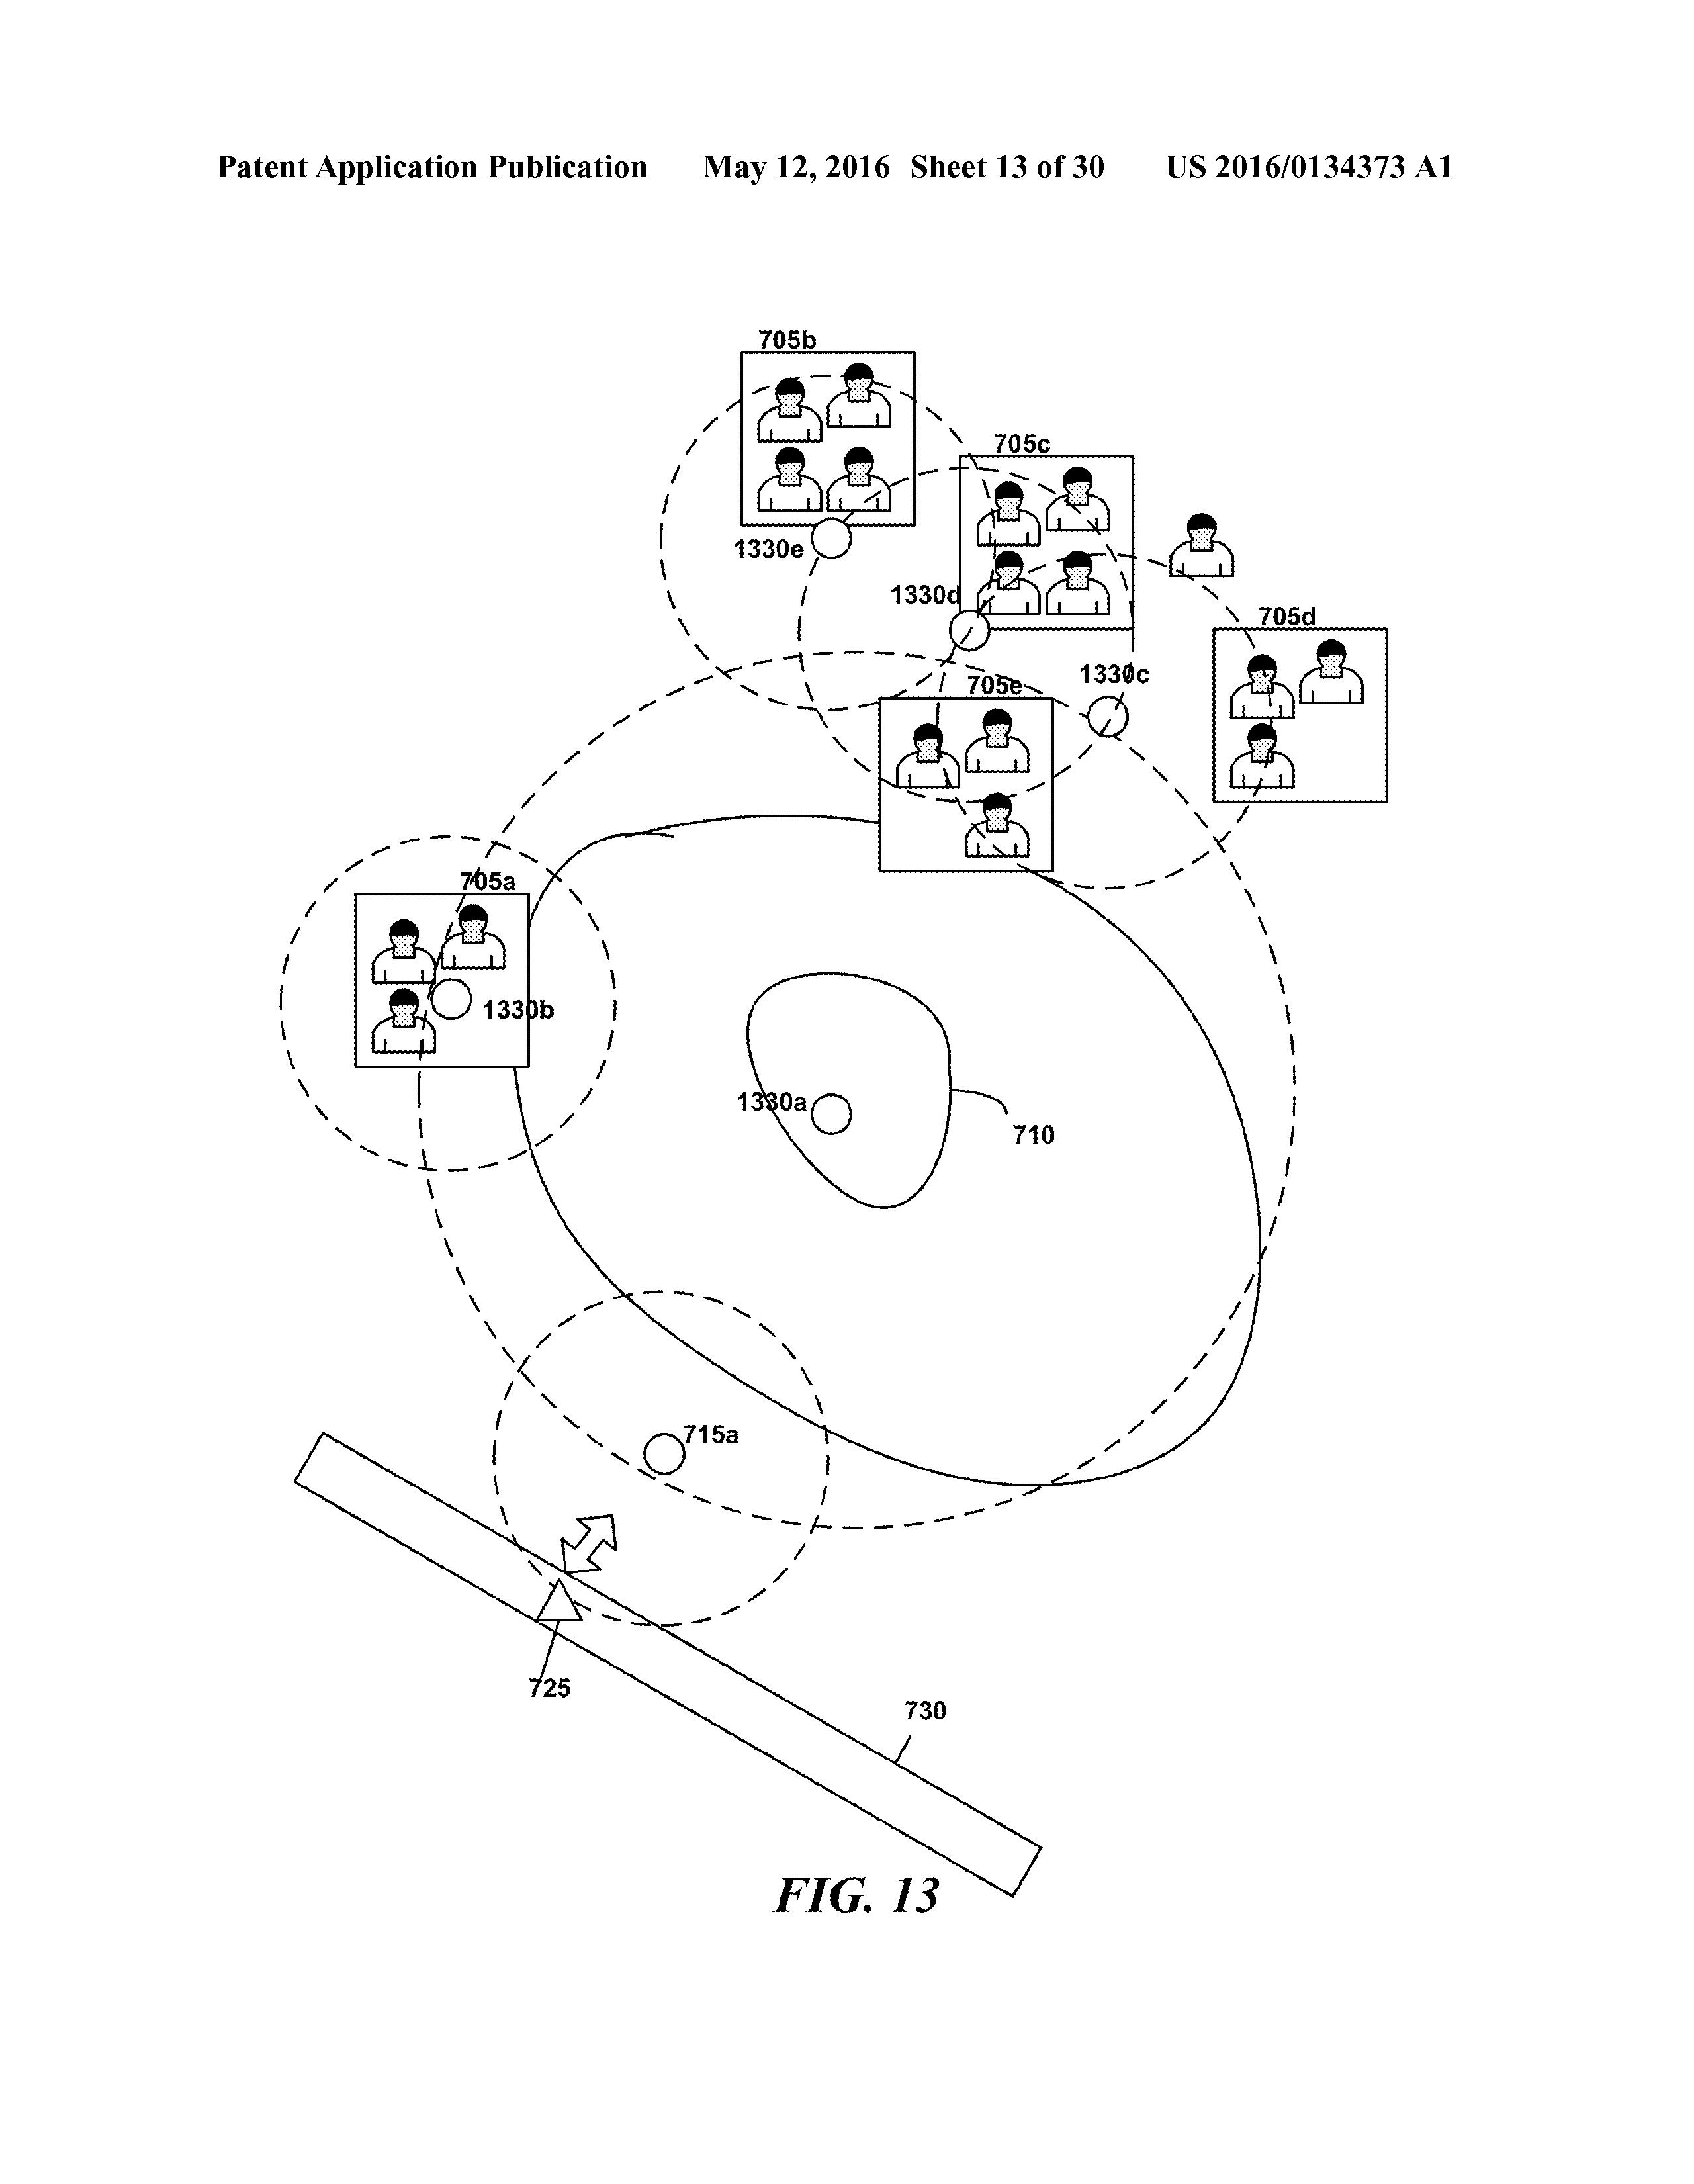 US20160134373A1 DEPLOYING LINE-OF-SIGHT COMMUNICATIONS NETWORKS